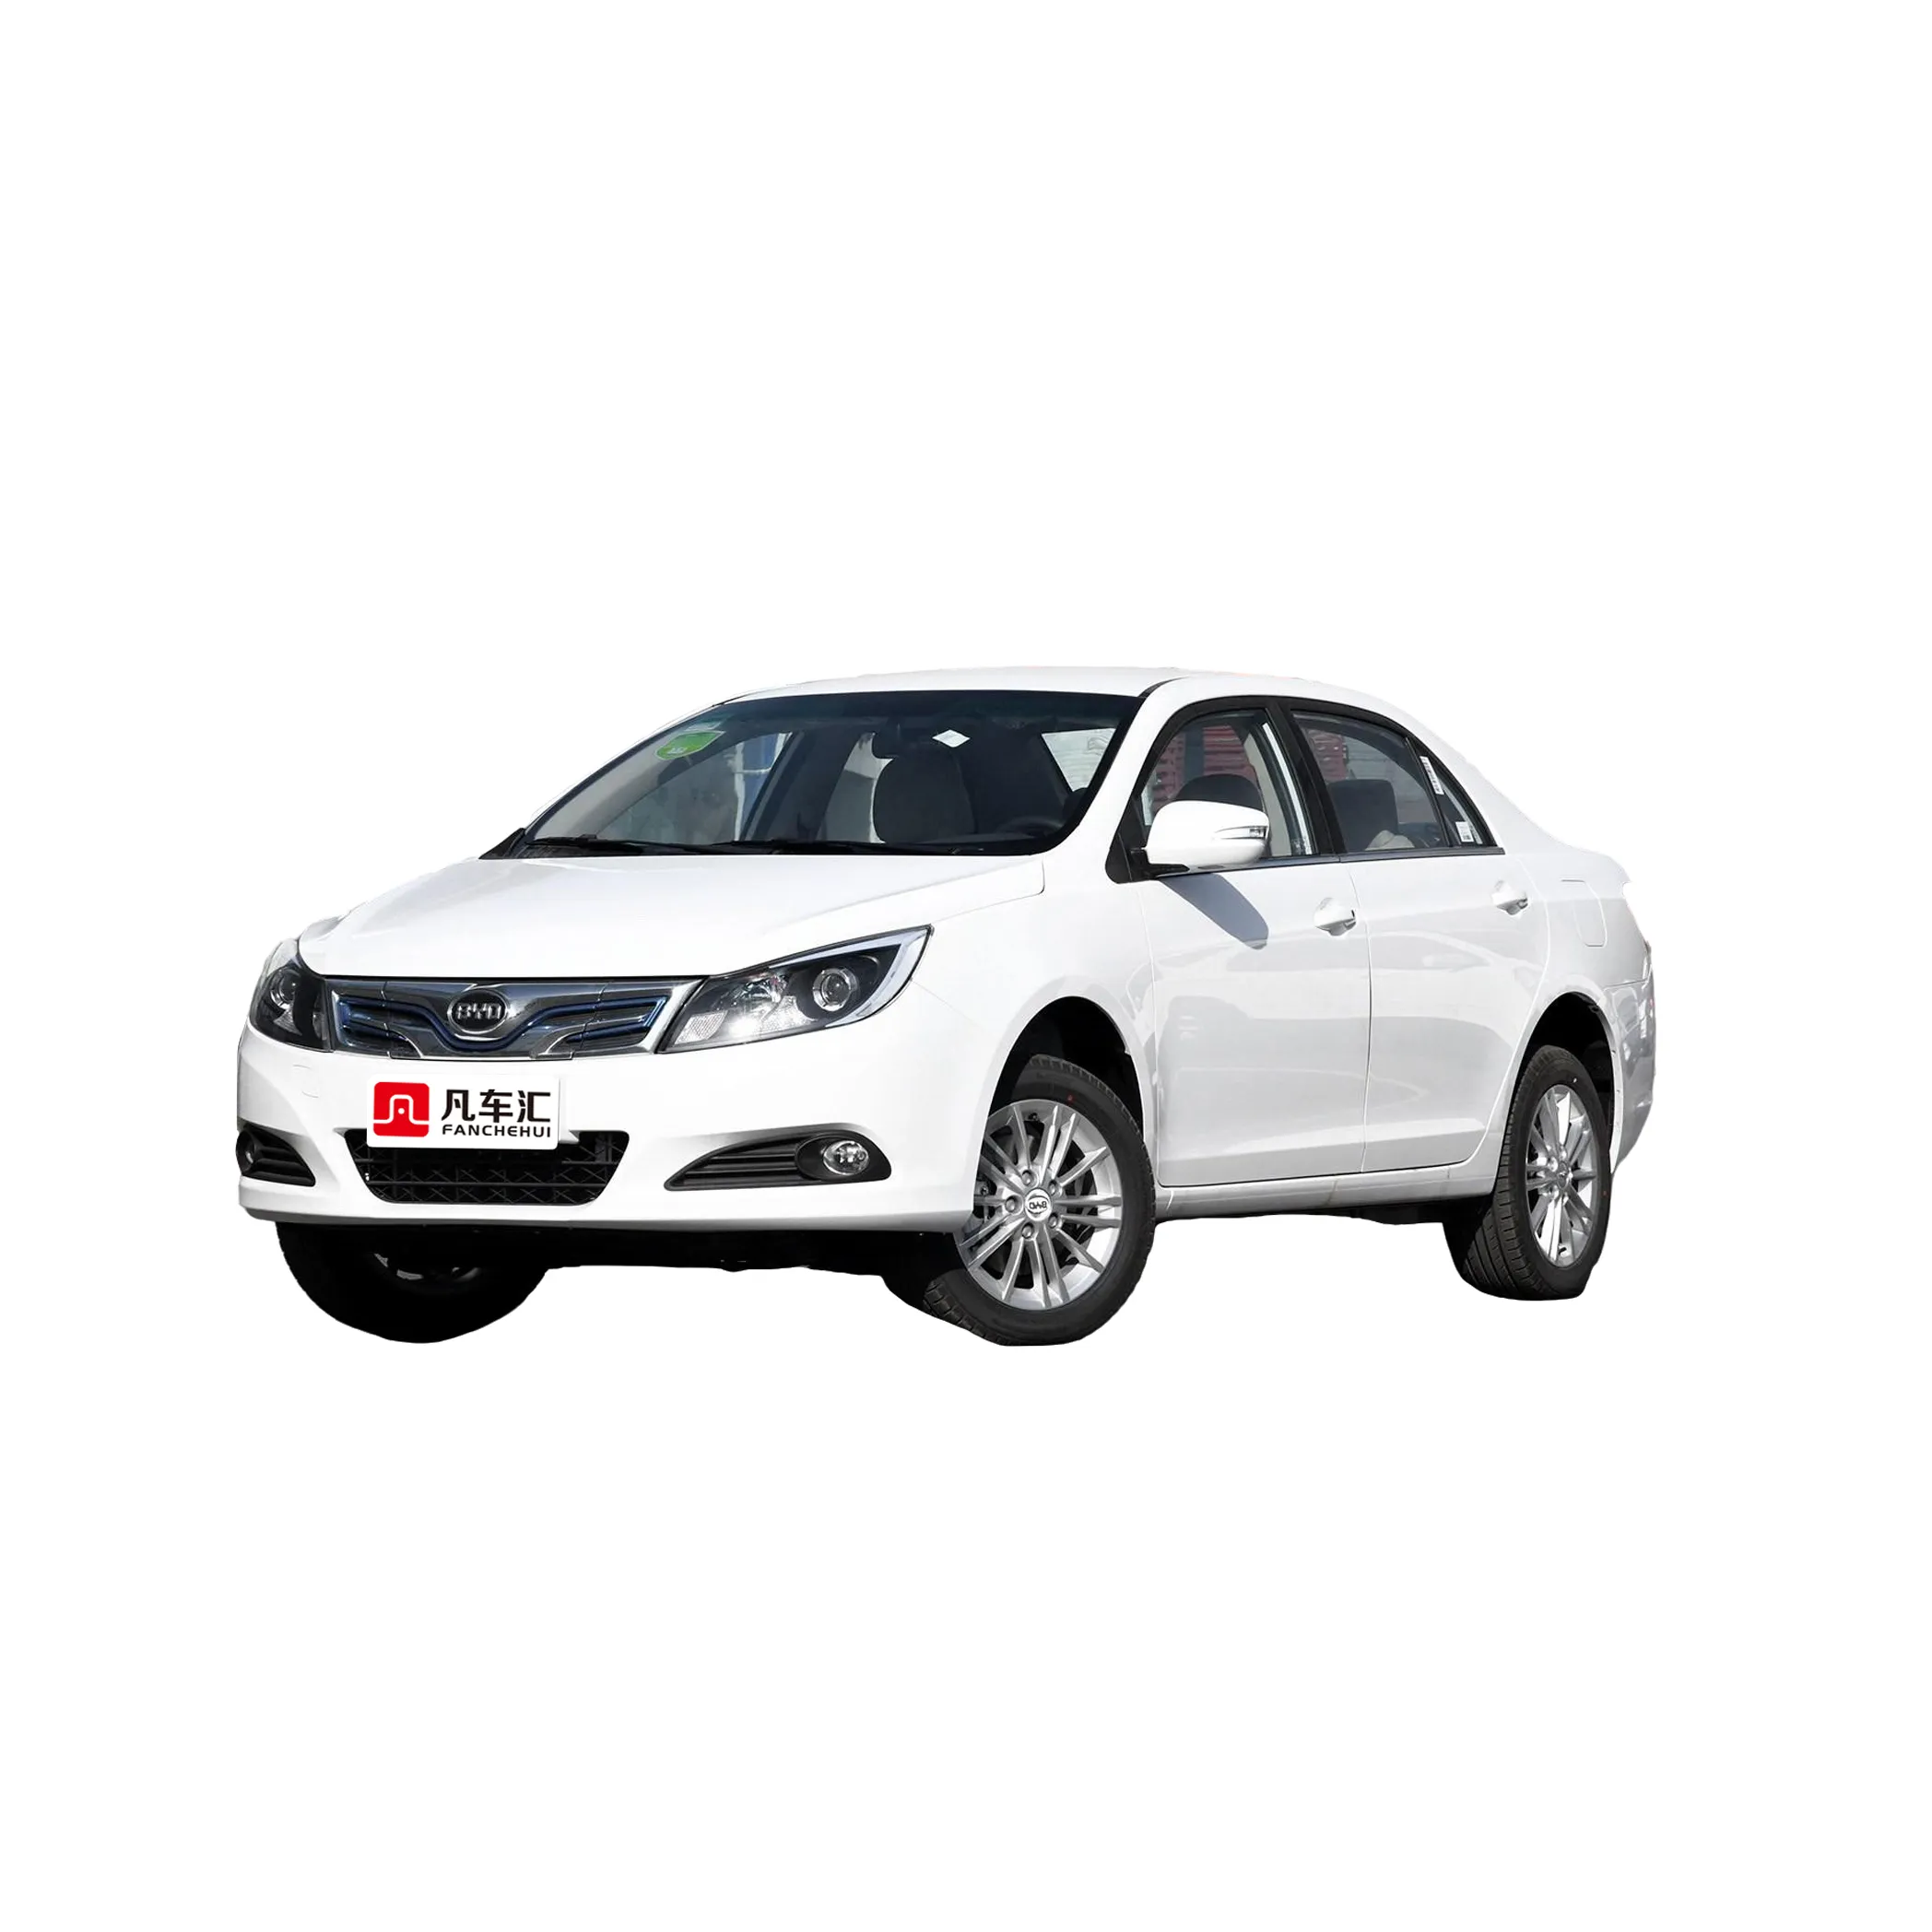 BYD E5 Cars Chinese LED Camera Electric Light Fabric Multi-function Automatic Used Cars Second Hand Cars Sunroof Hydraulic 2018